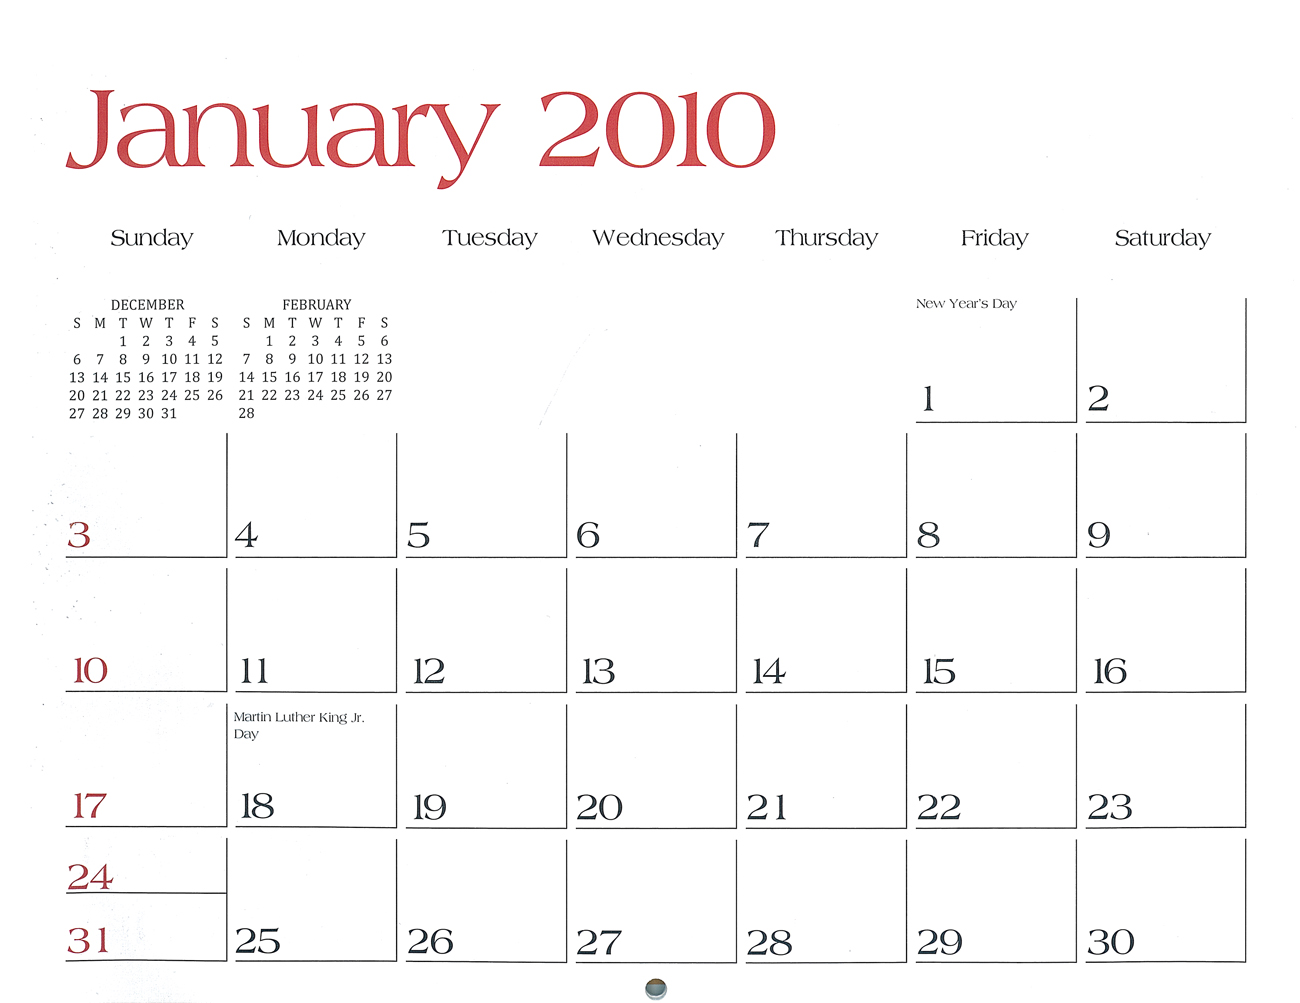 2010 Prophecy Calendar: January - He would be from the House of David